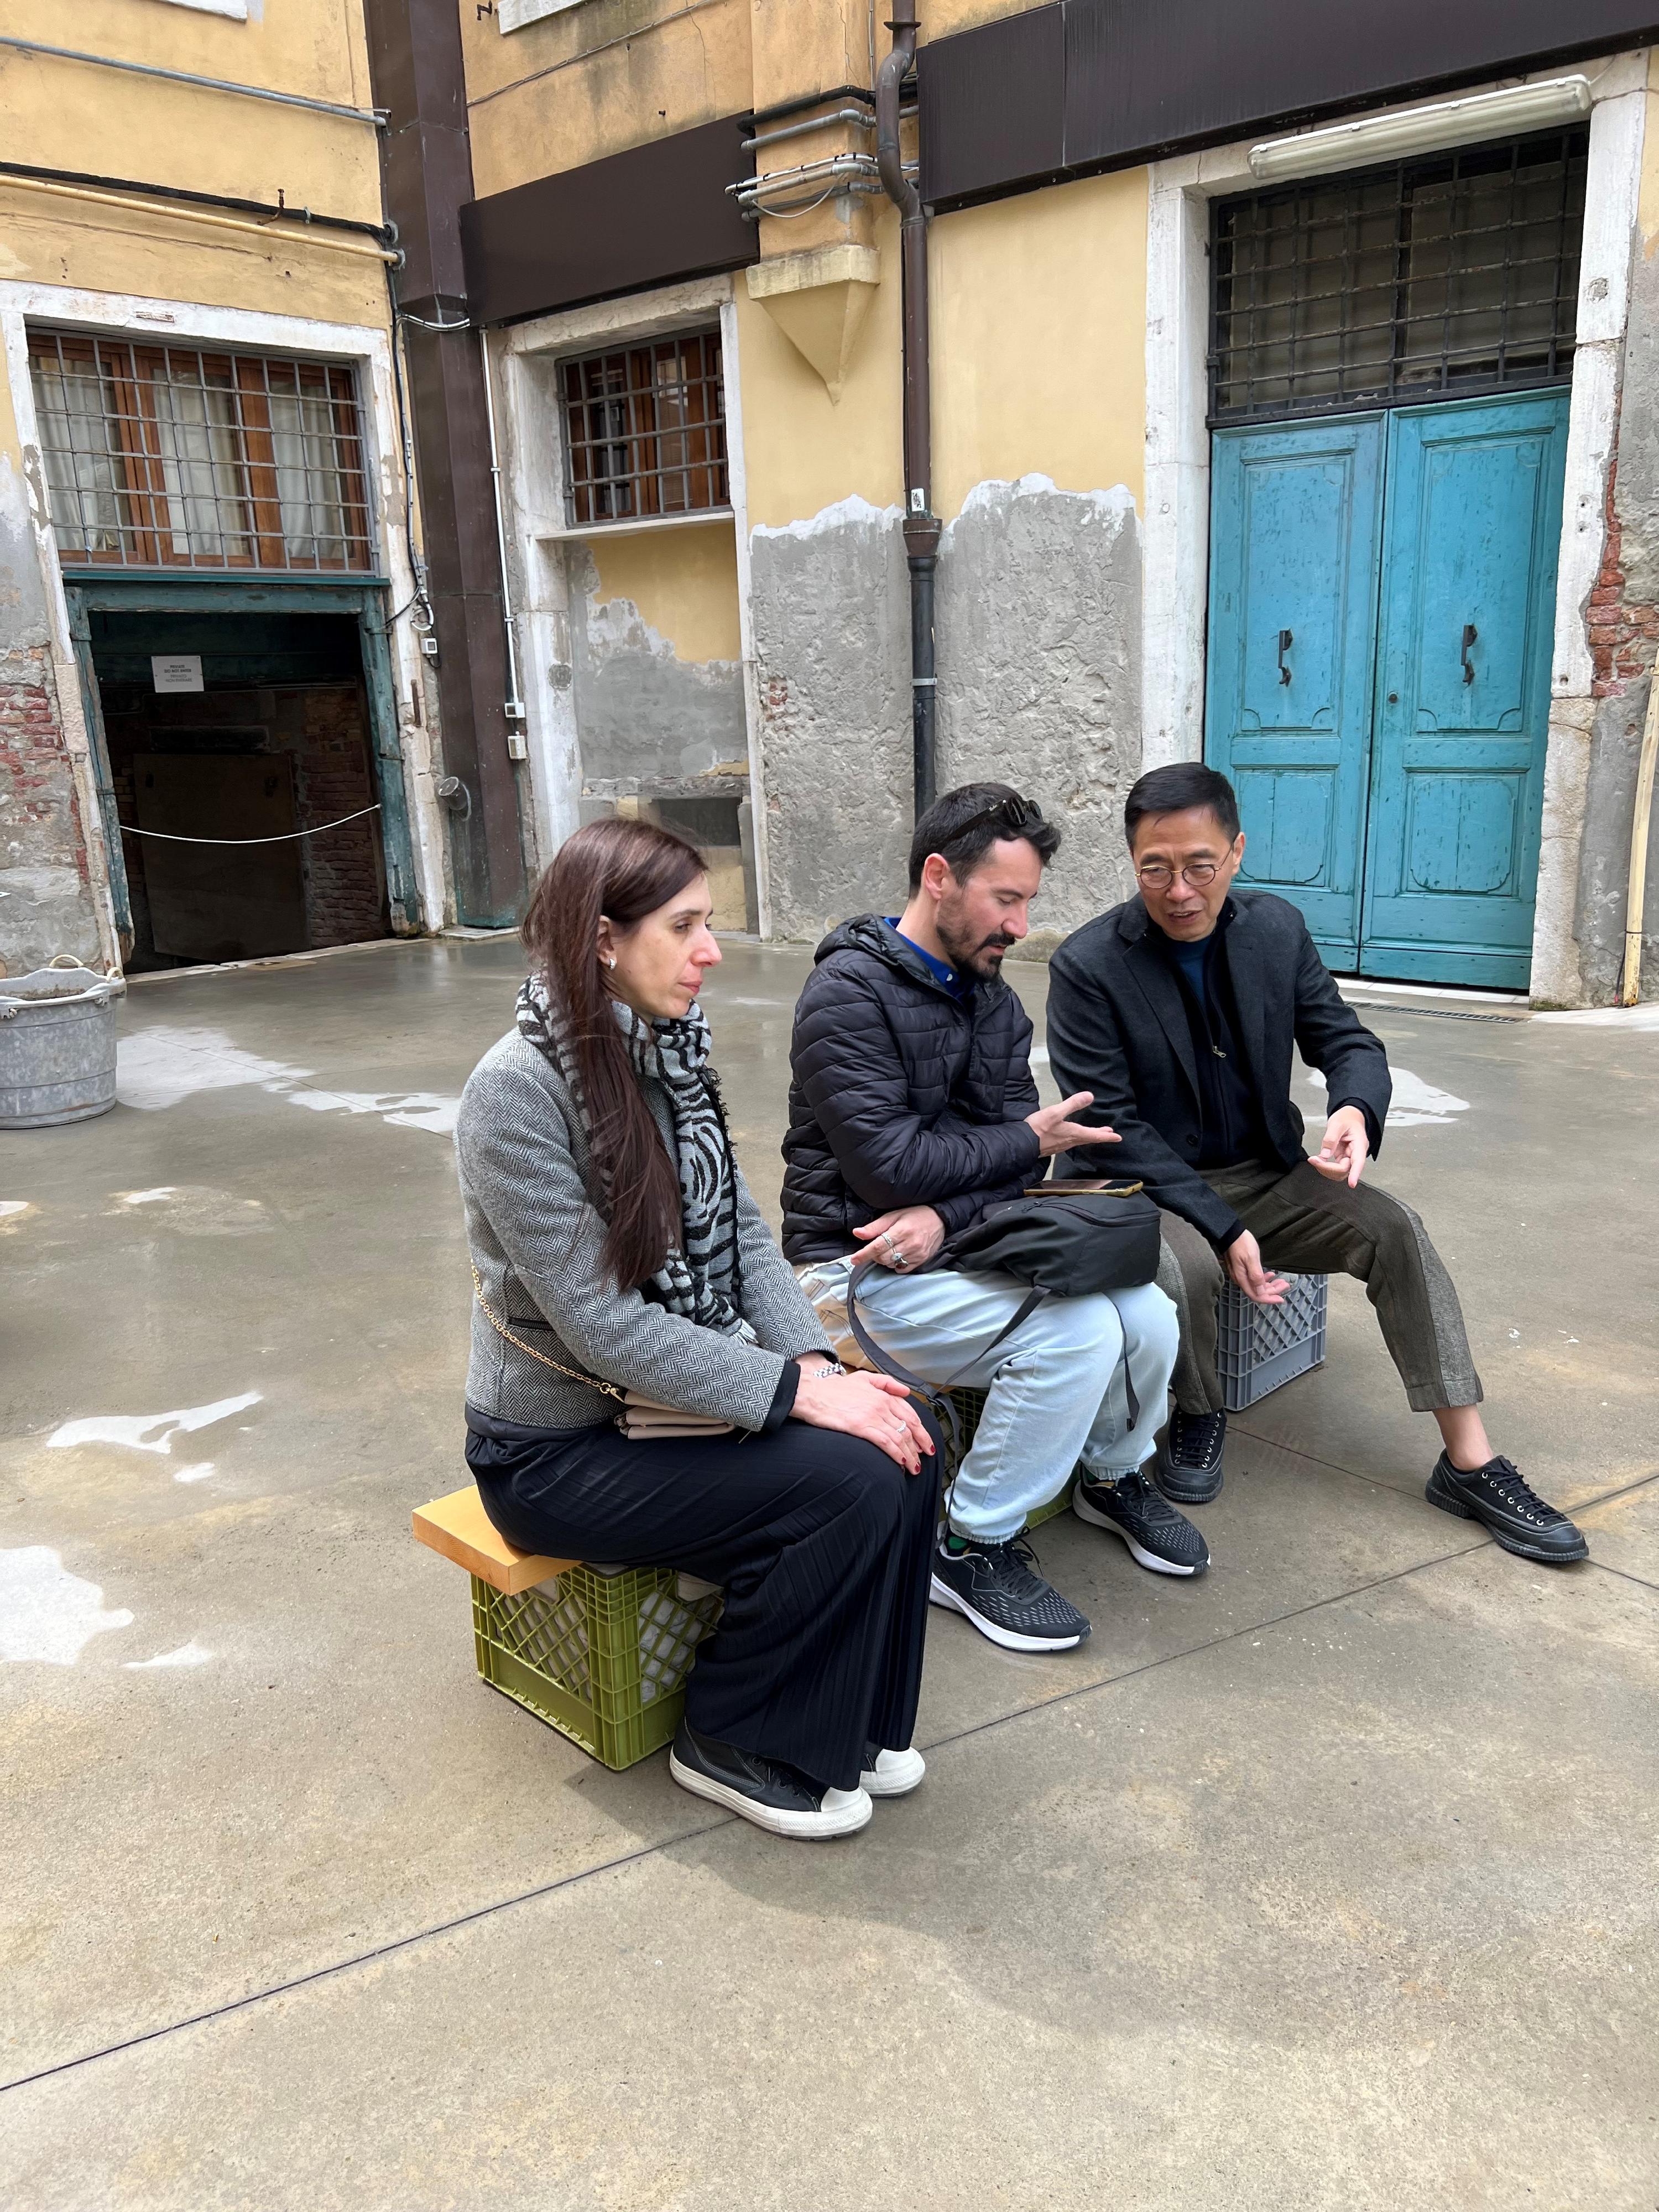 The Secretary for Culture, Sports and Tourism, Mr Kevin Yeung (right), visited the Venice Biennale in Venice, Italy, today (April 20, Venice time). He also had an interview with local arts and culture media.